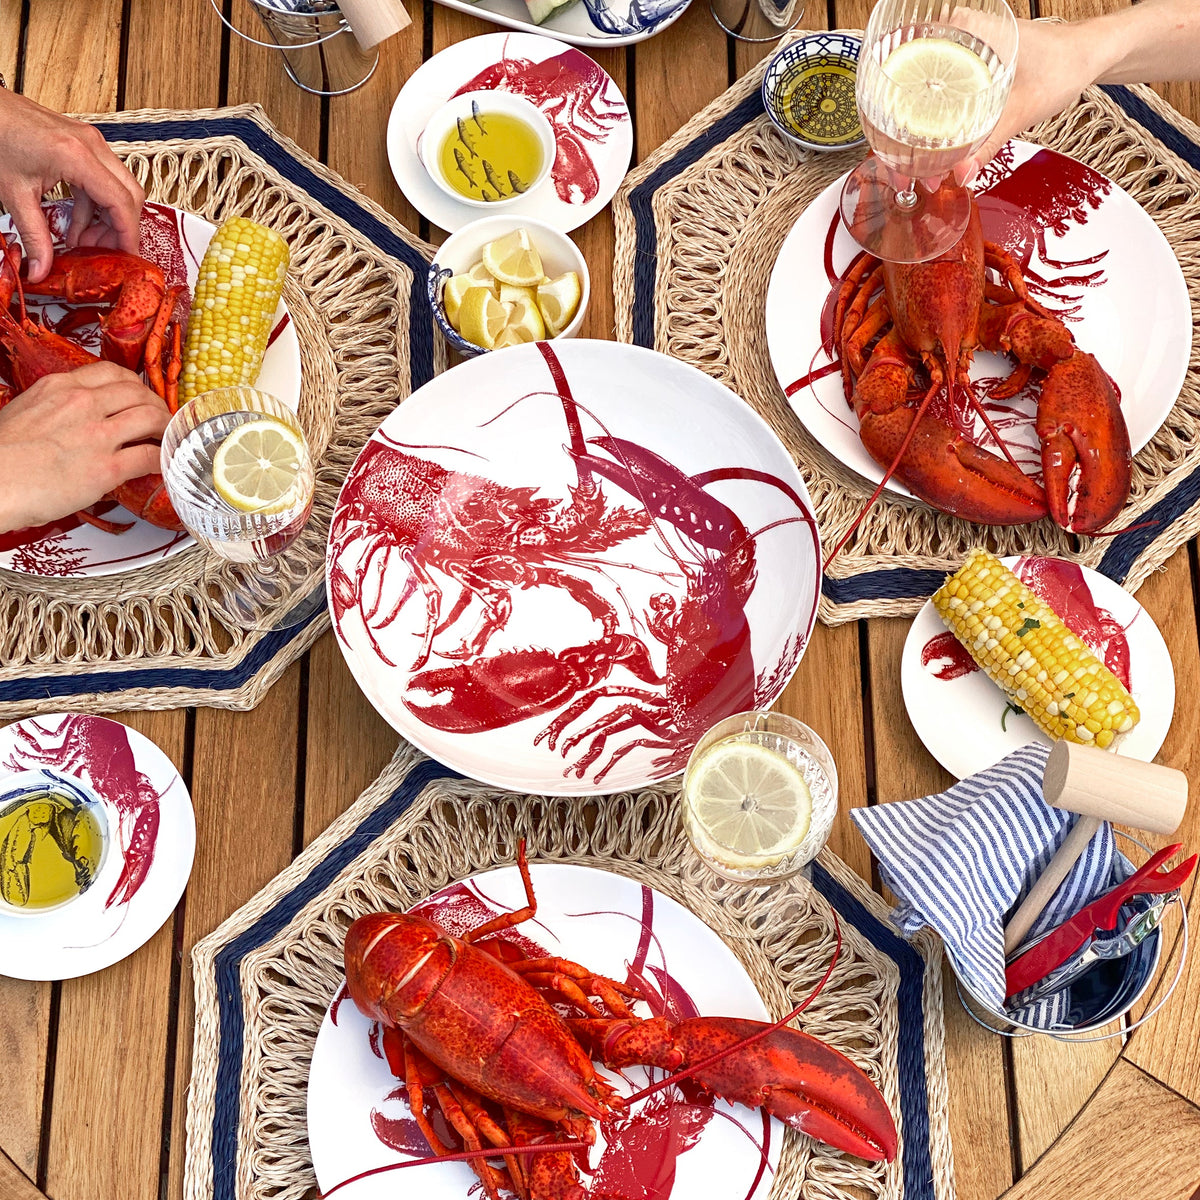 Four premium Caskata Lobster Coupe Dinner Plates paired with corn on the cob and lemon wedges on a wooden table. Three hands can be seen, one holding a glass of lemonade. The scene is set on nautical-themed placemats, showcasing these dishwasher and microwave safe seaside style dinner plates.